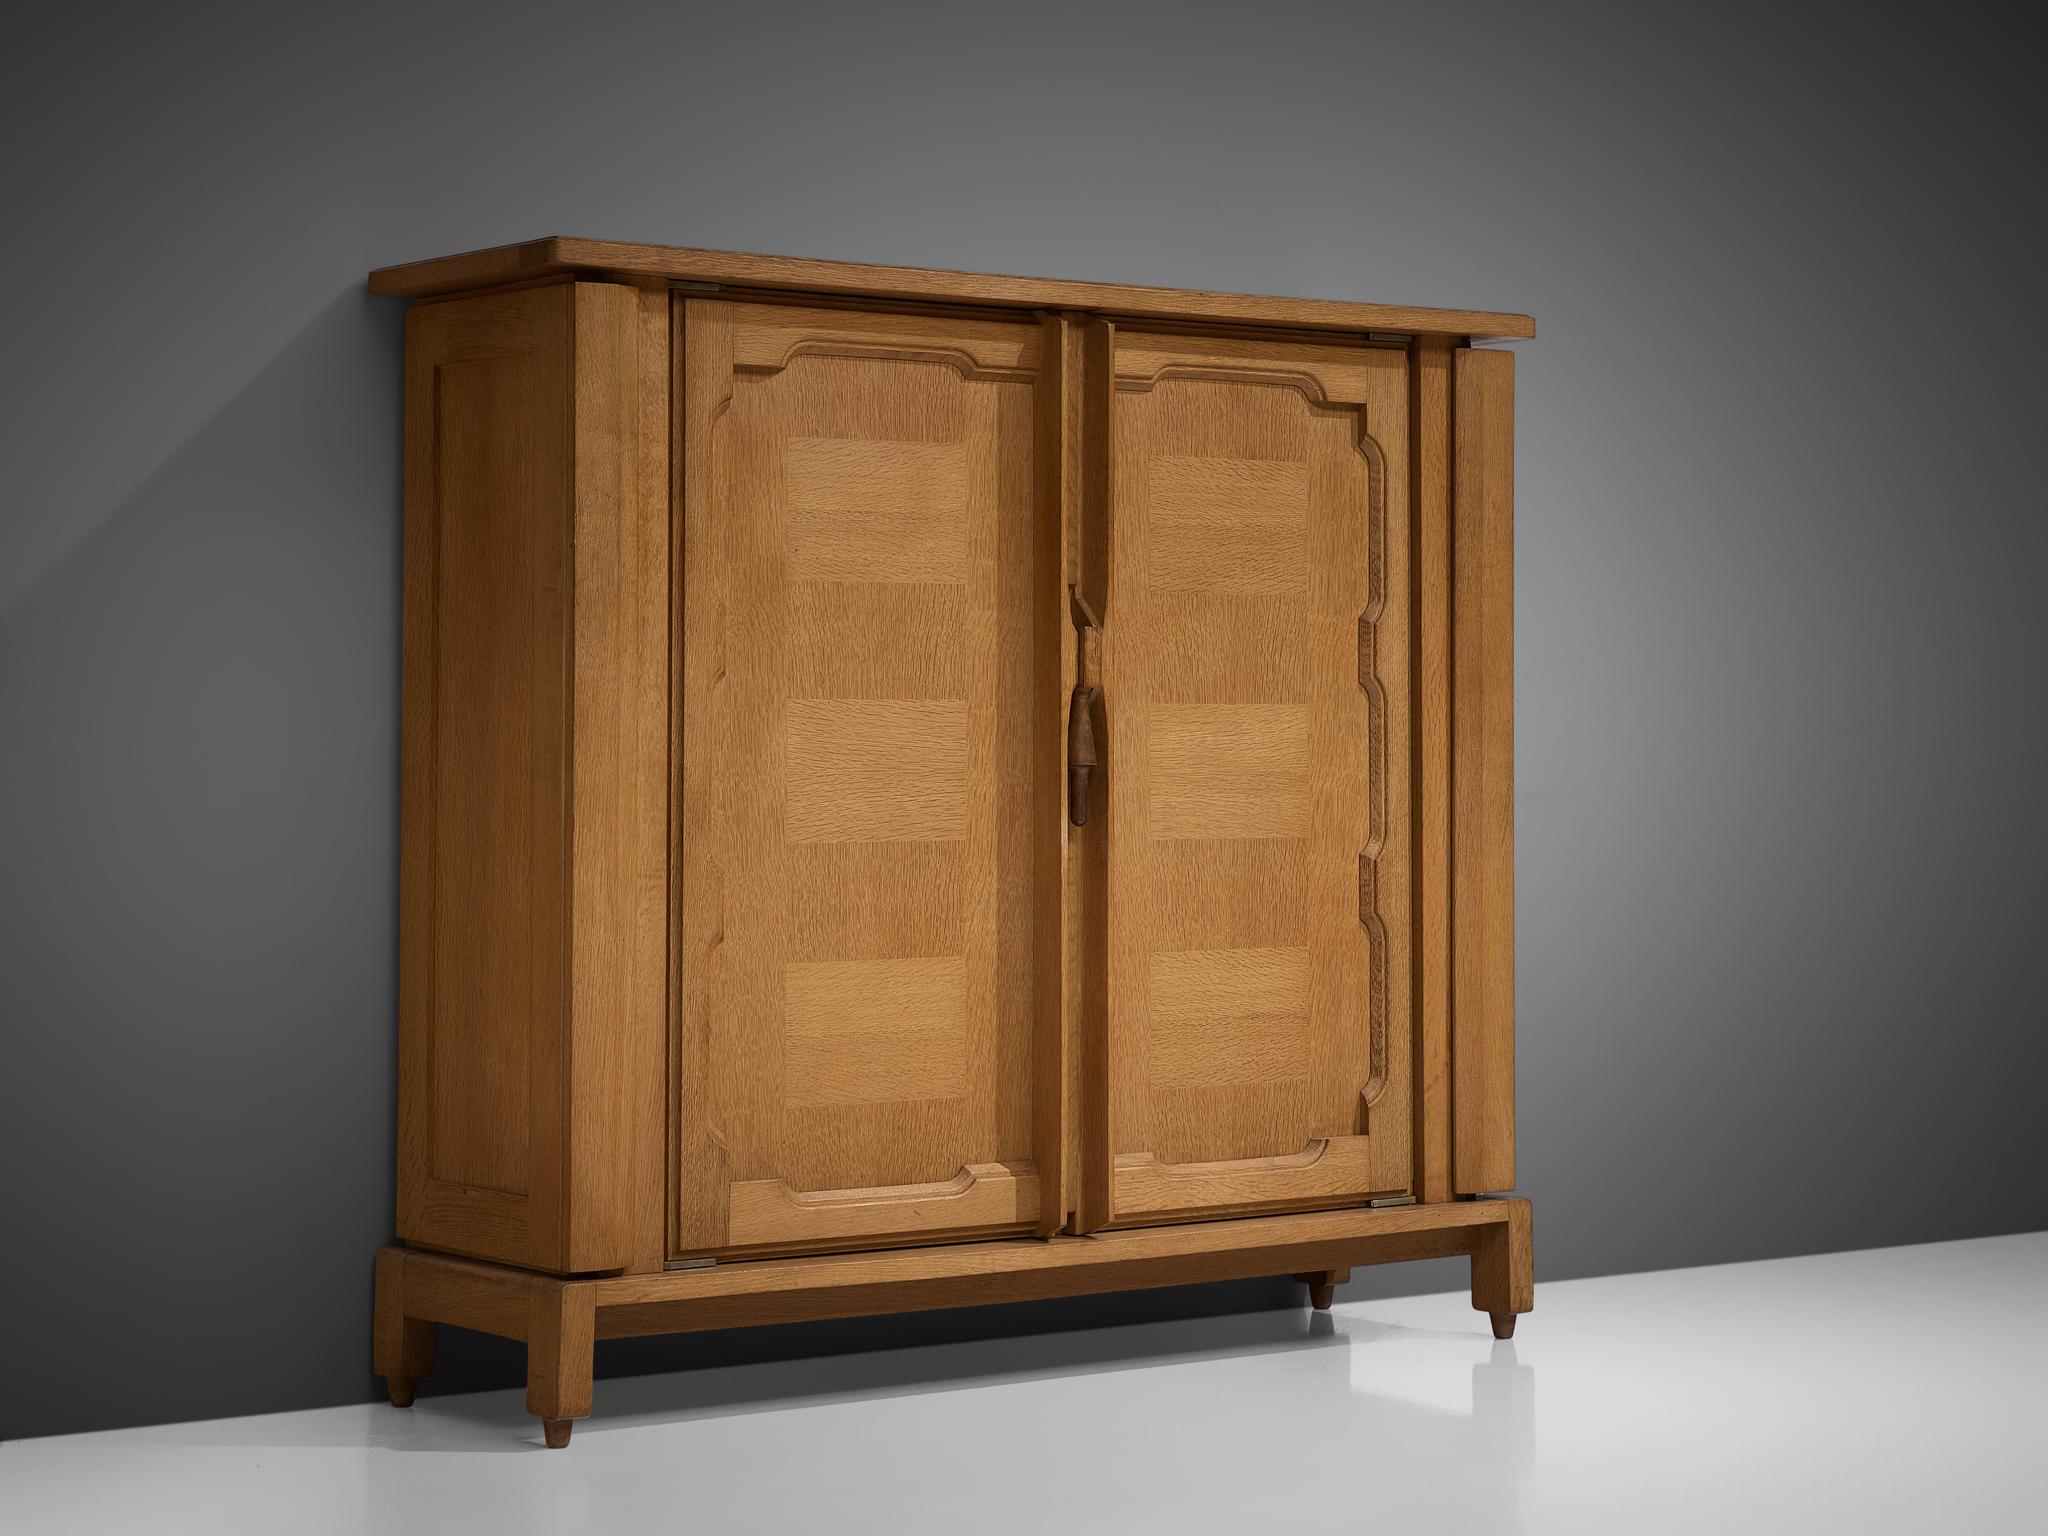 Guillerme and Chambron for Votre Maison, 'Bouviene' cabinet, oak, France, circa 1970.

This case piece is designed by Guillerme and Chambron and features geometric inlays in the doors. The cabinet offers plenty of storage, with a large compartment